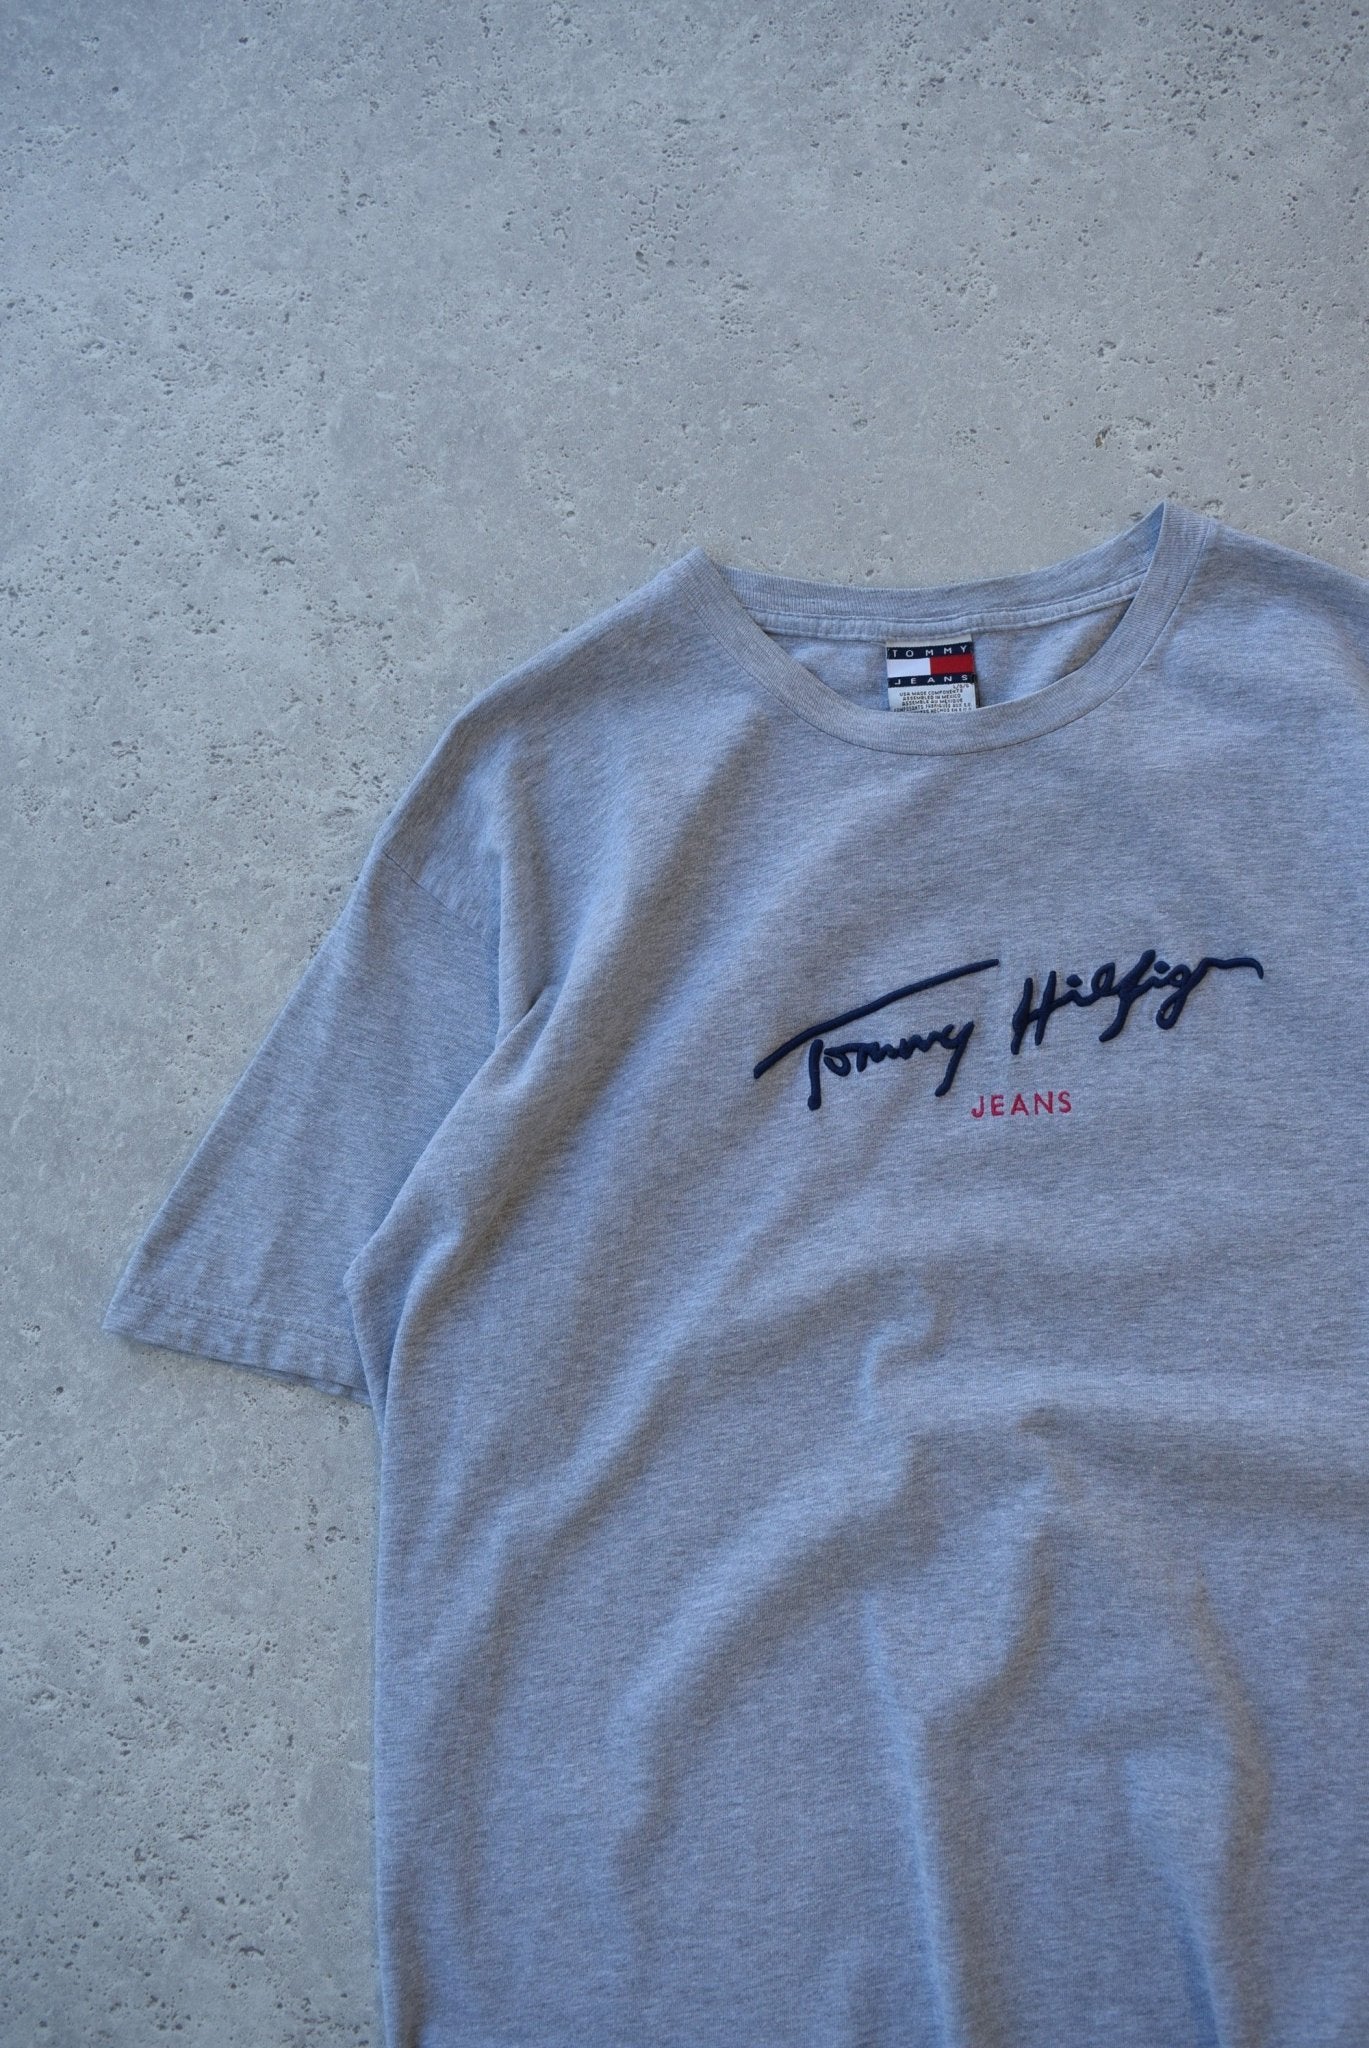 Vintage Tommy Hilfiger Jeans Embroidered Tee (XL) - Retrospective Store